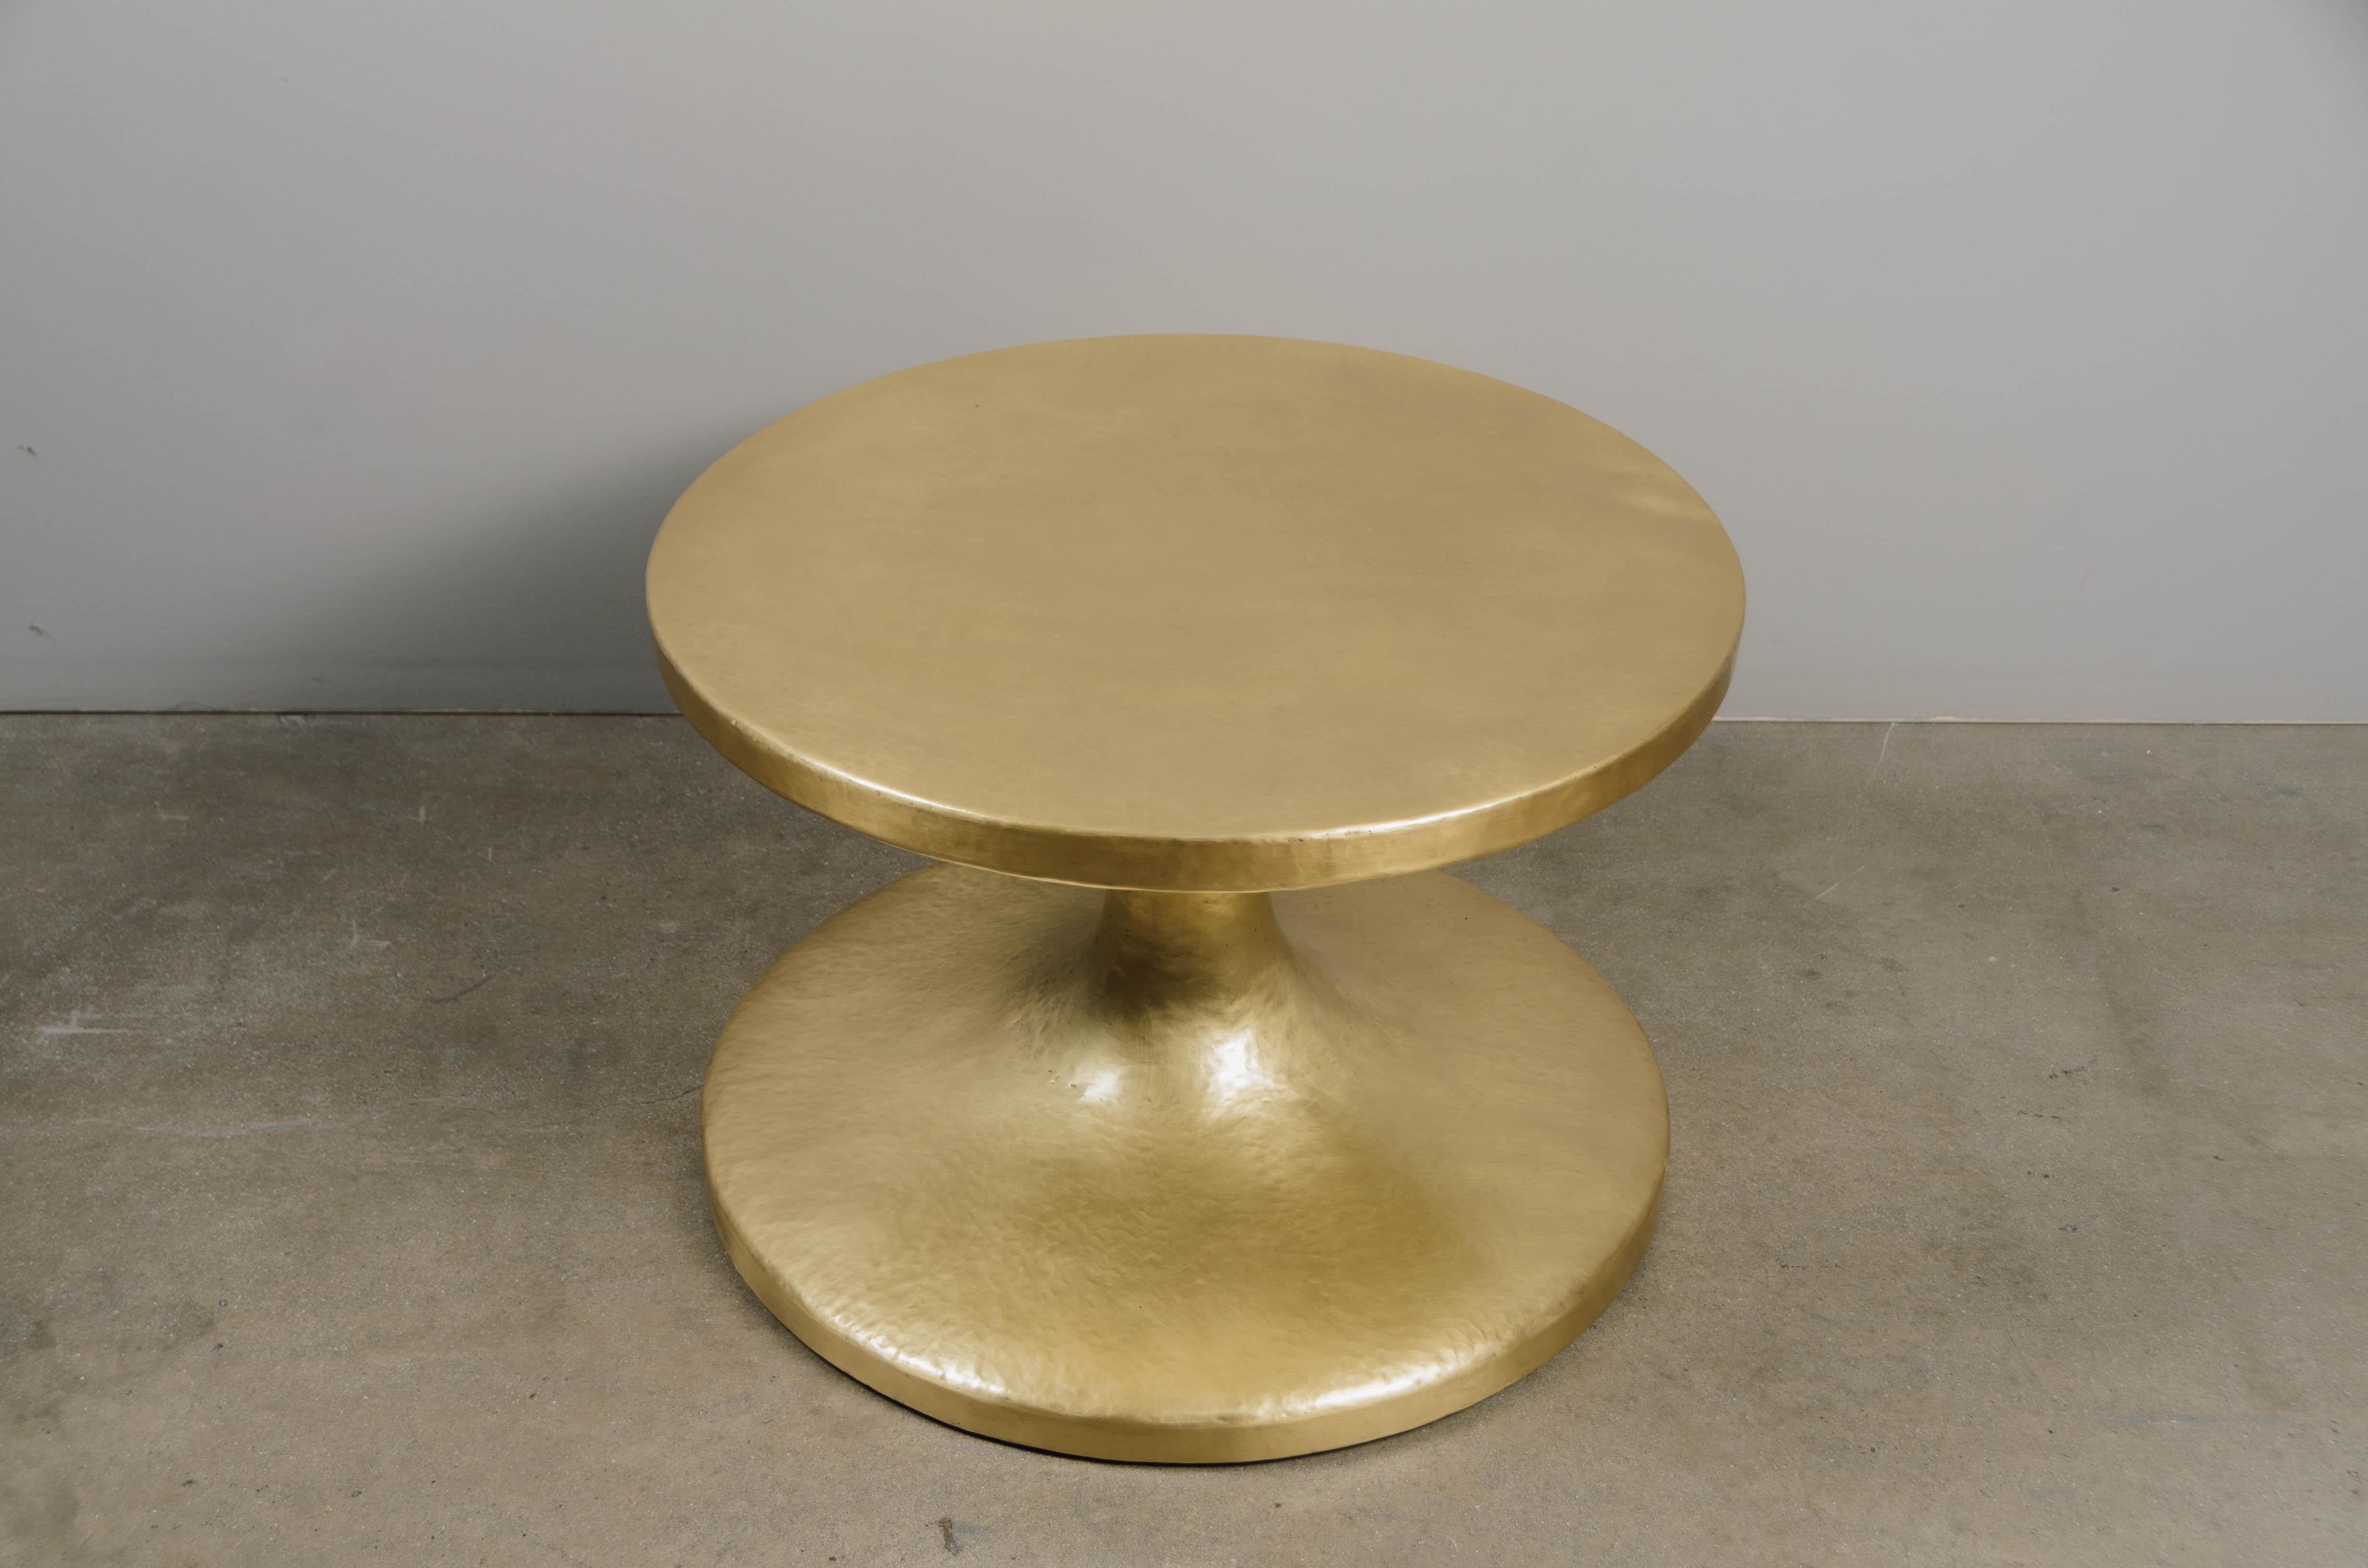 Minimalist Contemporary Spool Side Table in Brass by Robert Kuo, Hand Repoussé For Sale